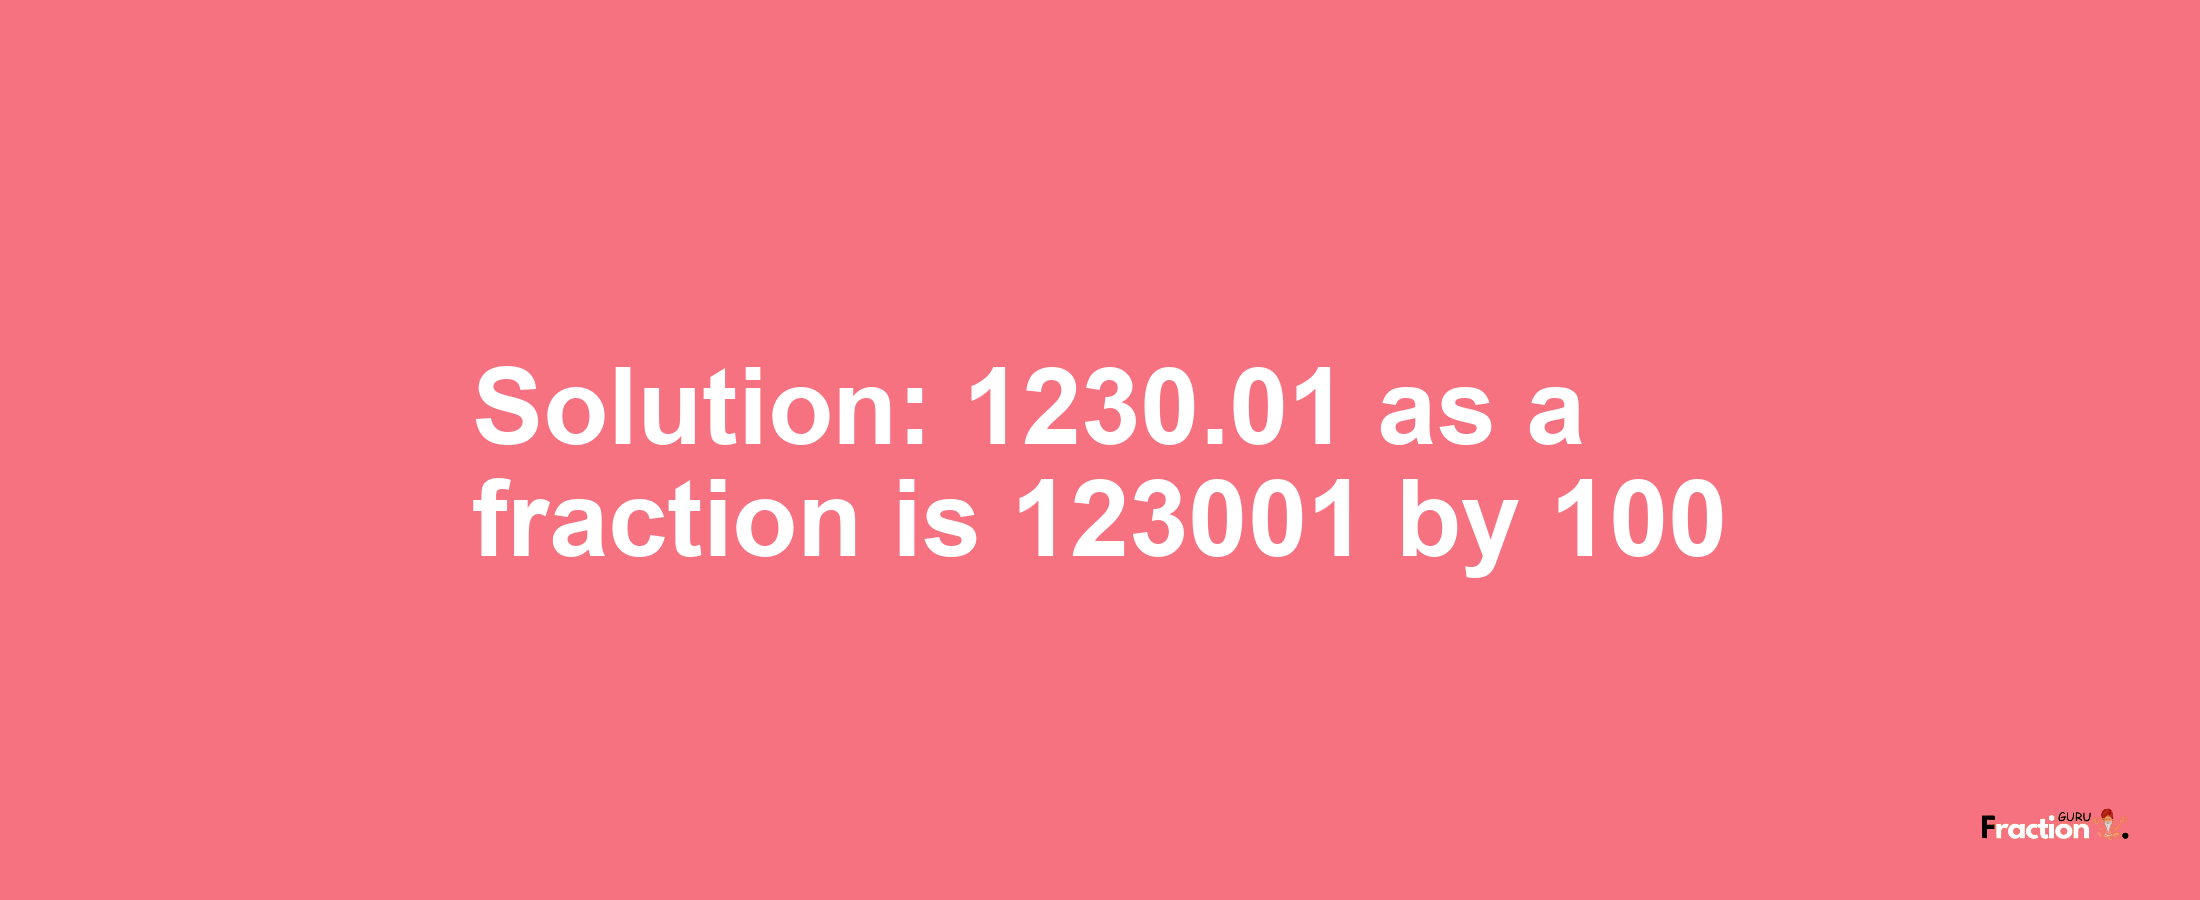 Solution:1230.01 as a fraction is 123001/100